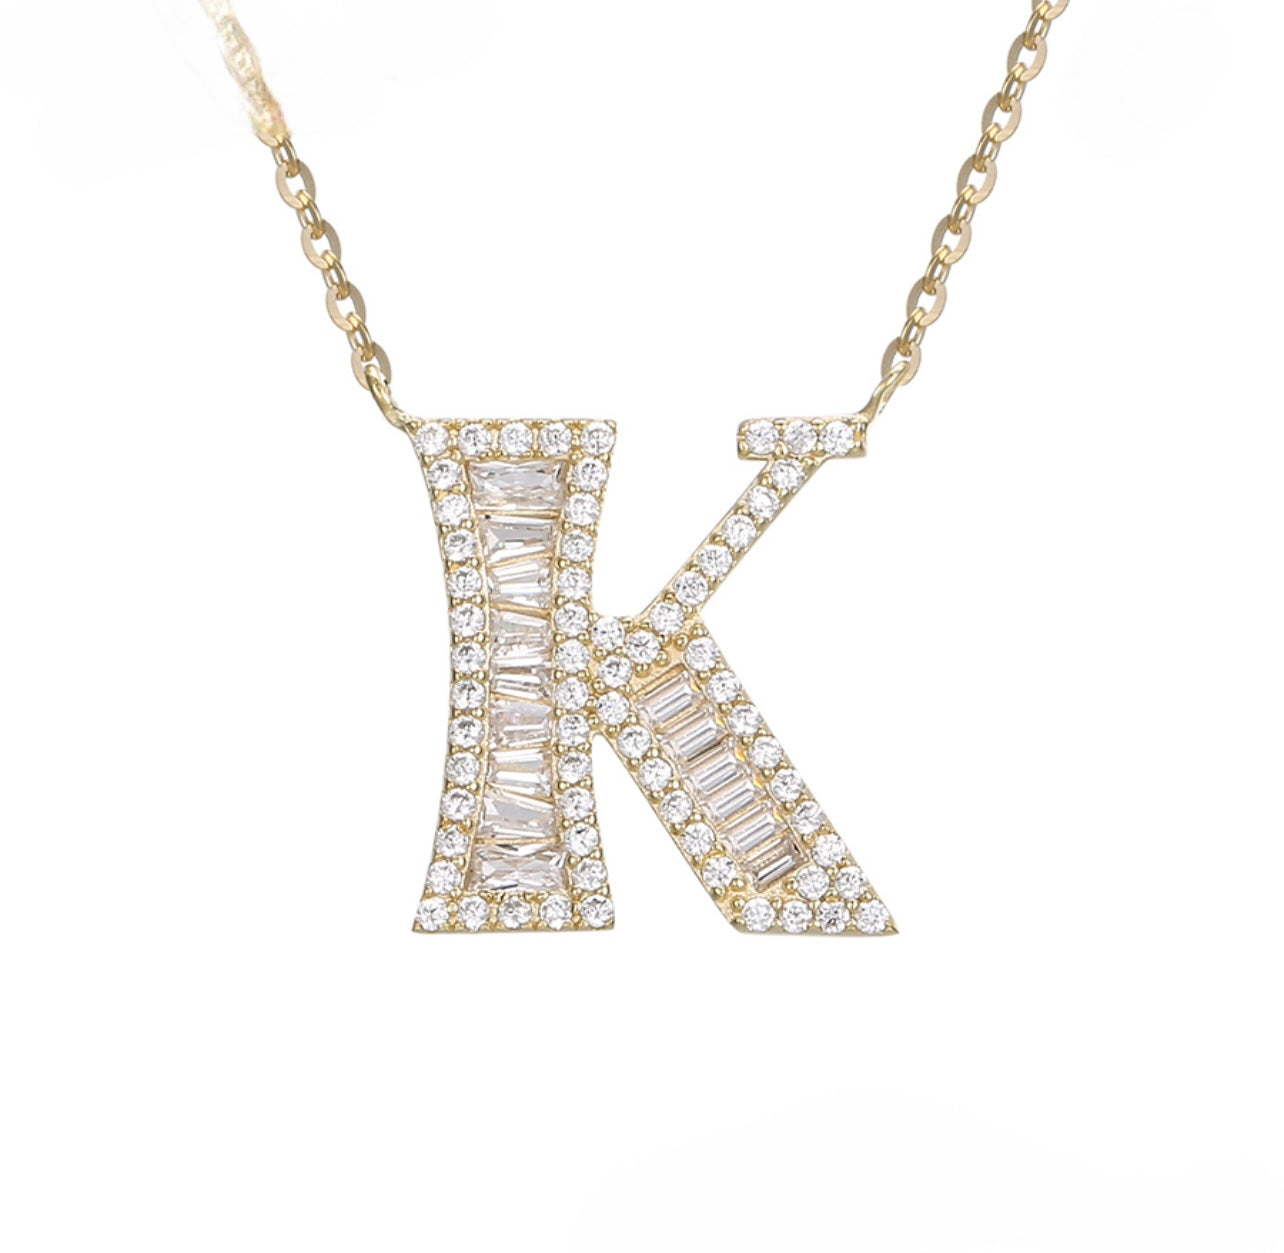 S925 Silver 14K Gold Plated Initial K Necklace